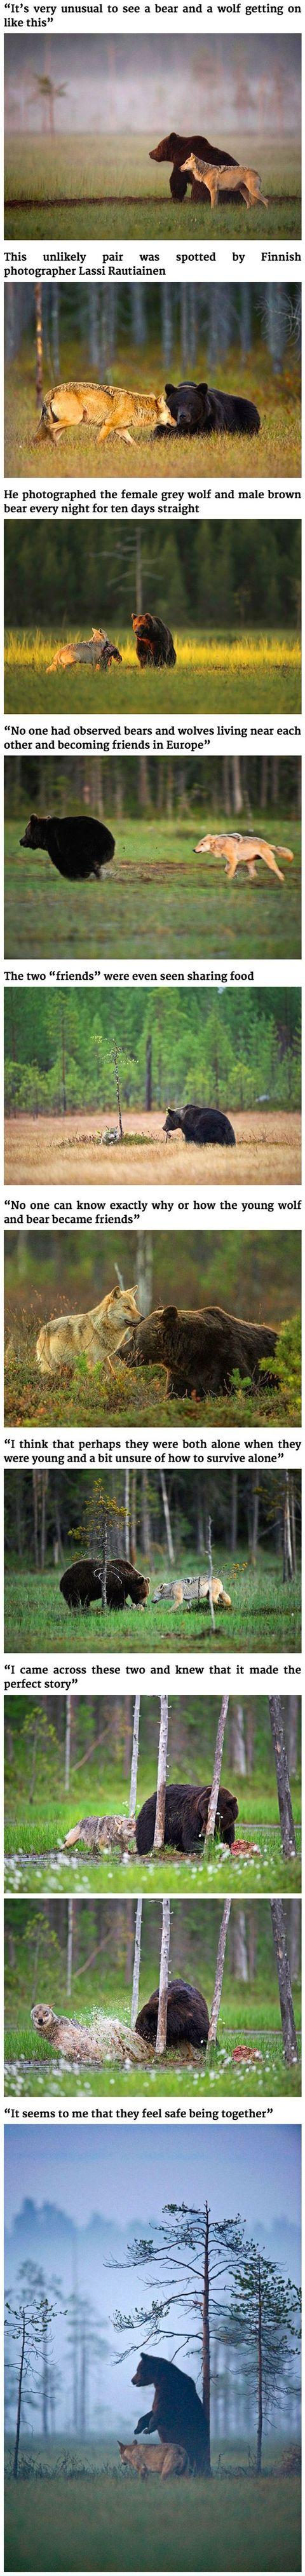 Best Friends - Bear and Wolf